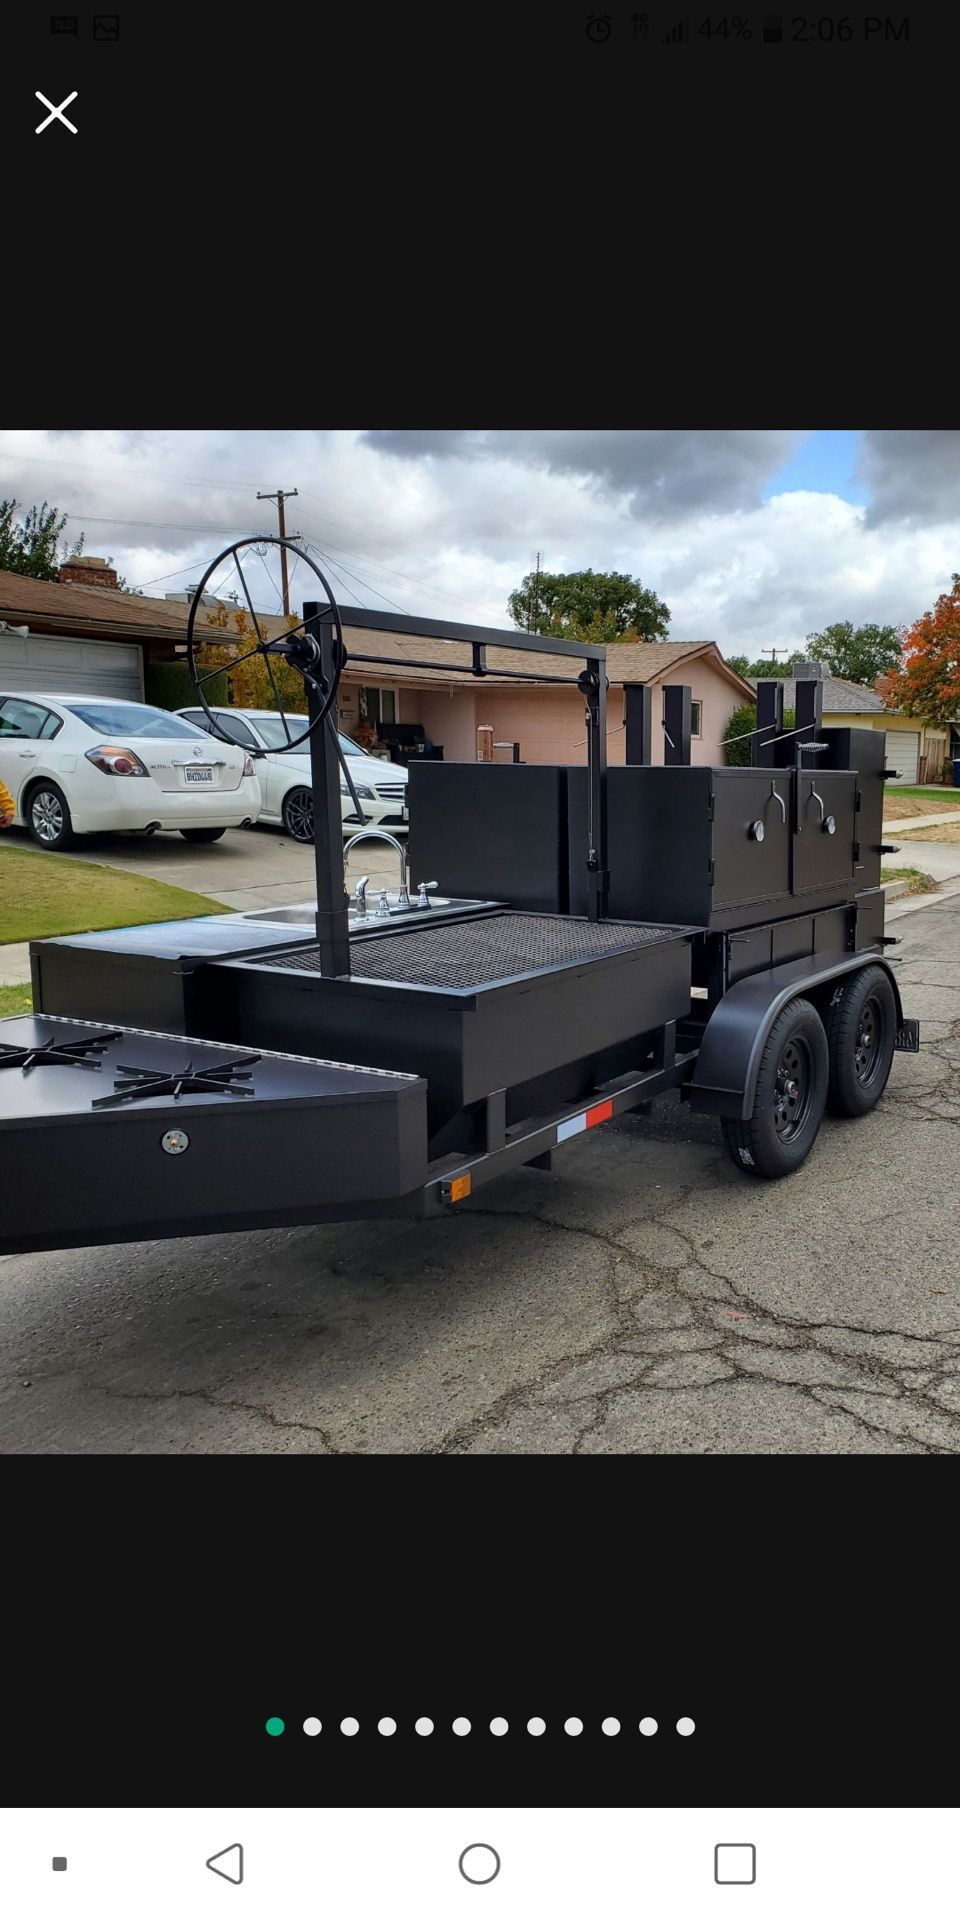 Bbq Grills And Trailers